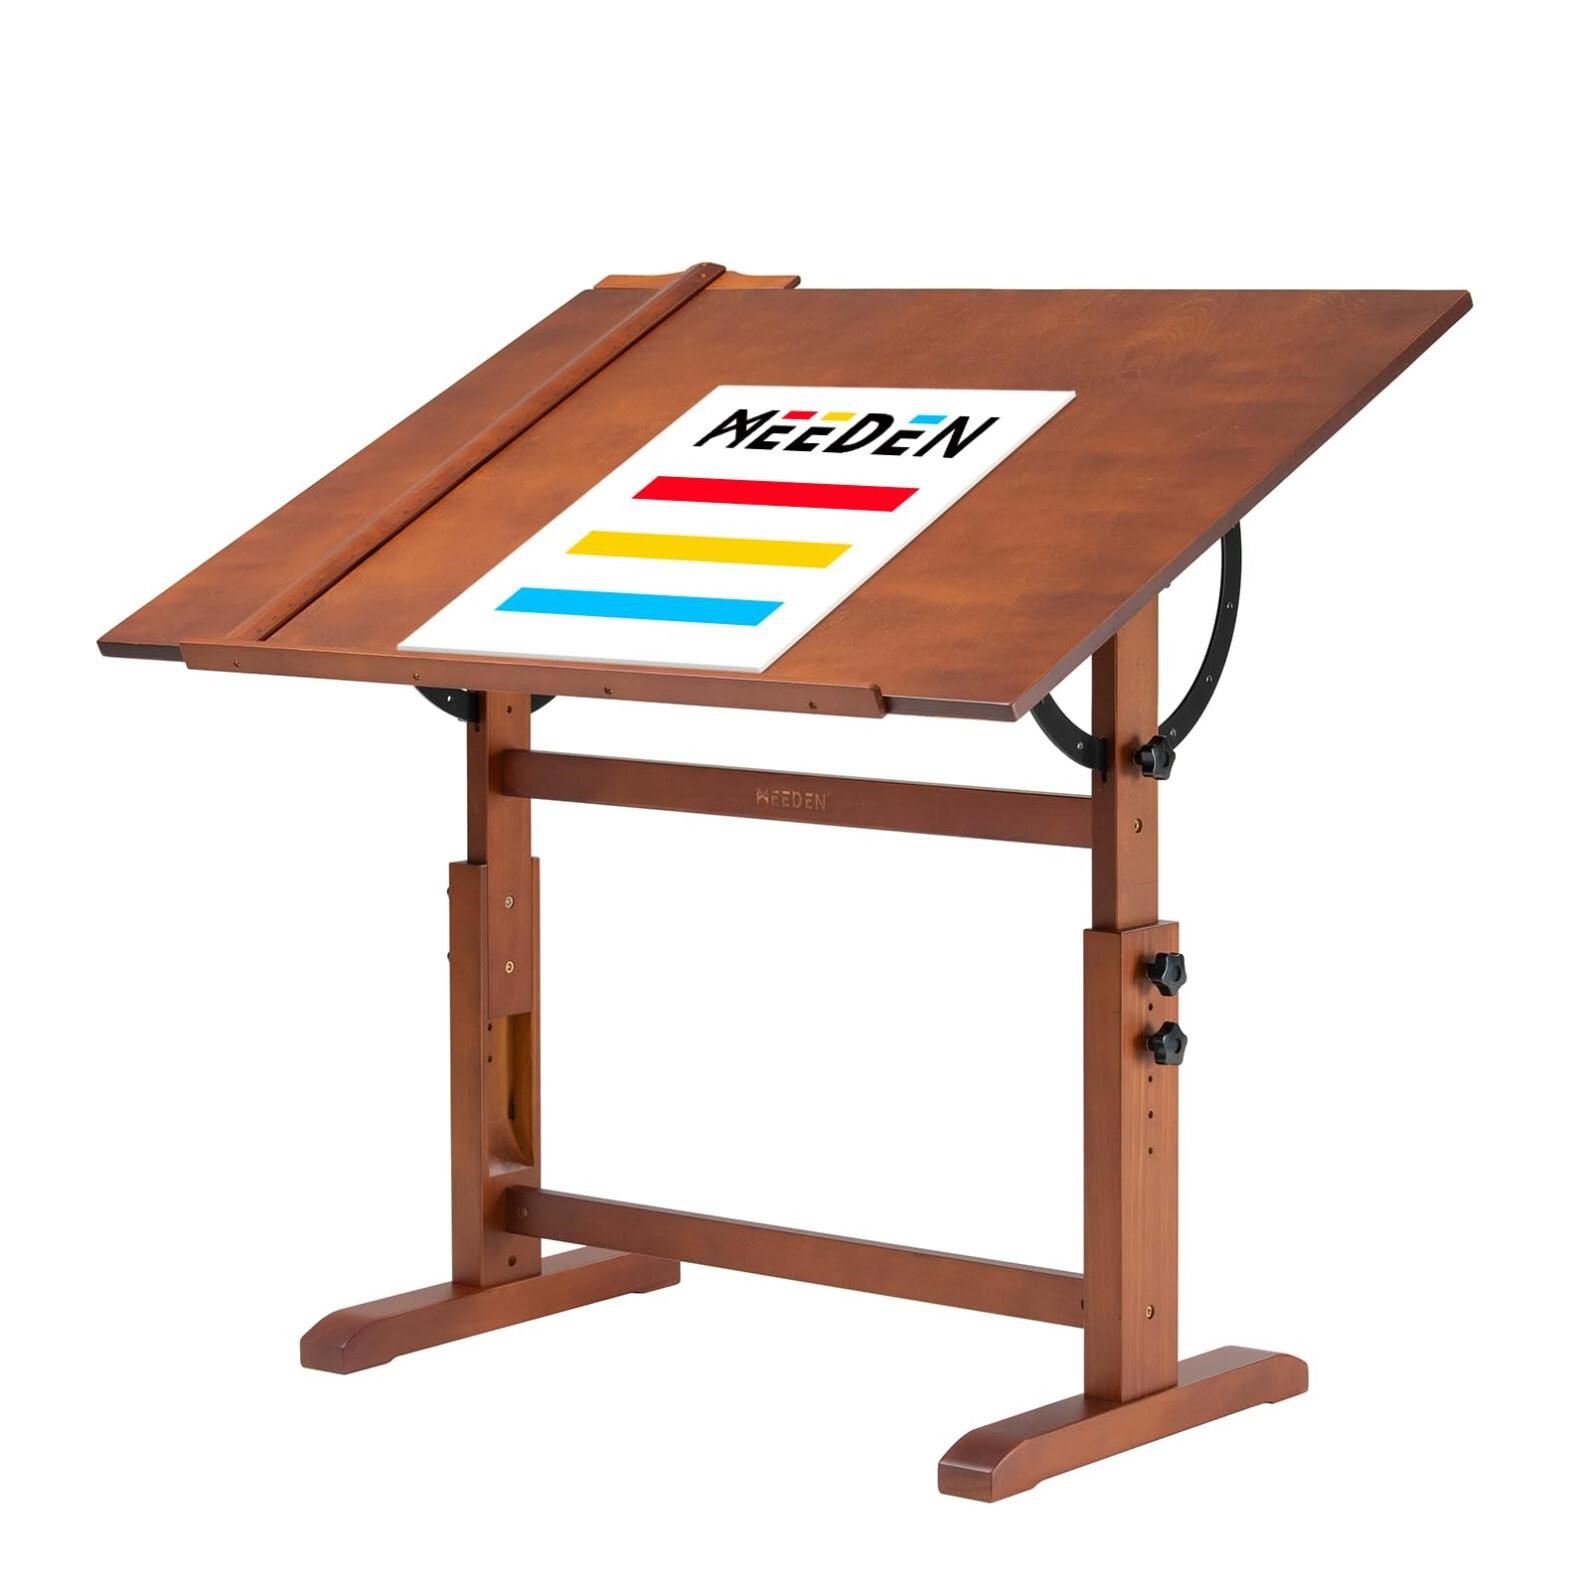 MEEDEN Extra Large Wood Drafting Table, 30" x 42"